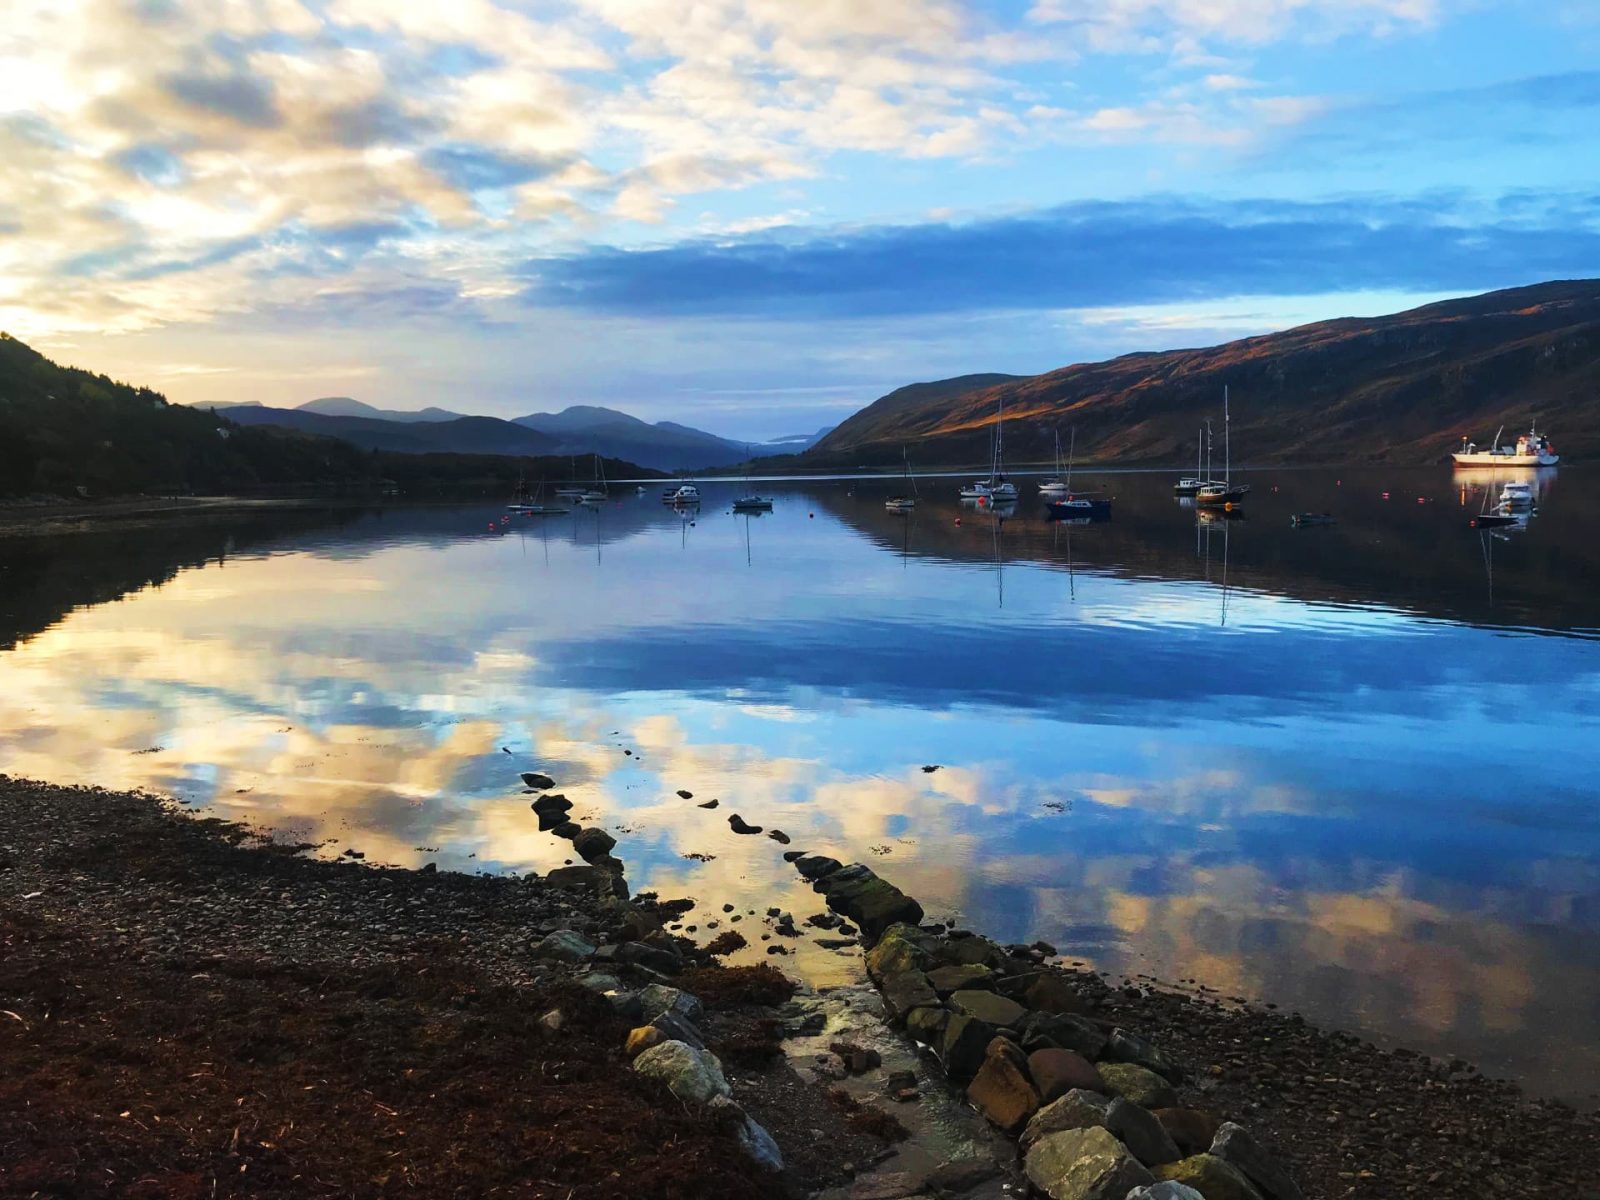 Sunrise over Loch Broom, Ullapool - one of the most beautiful lochs in Scotland!